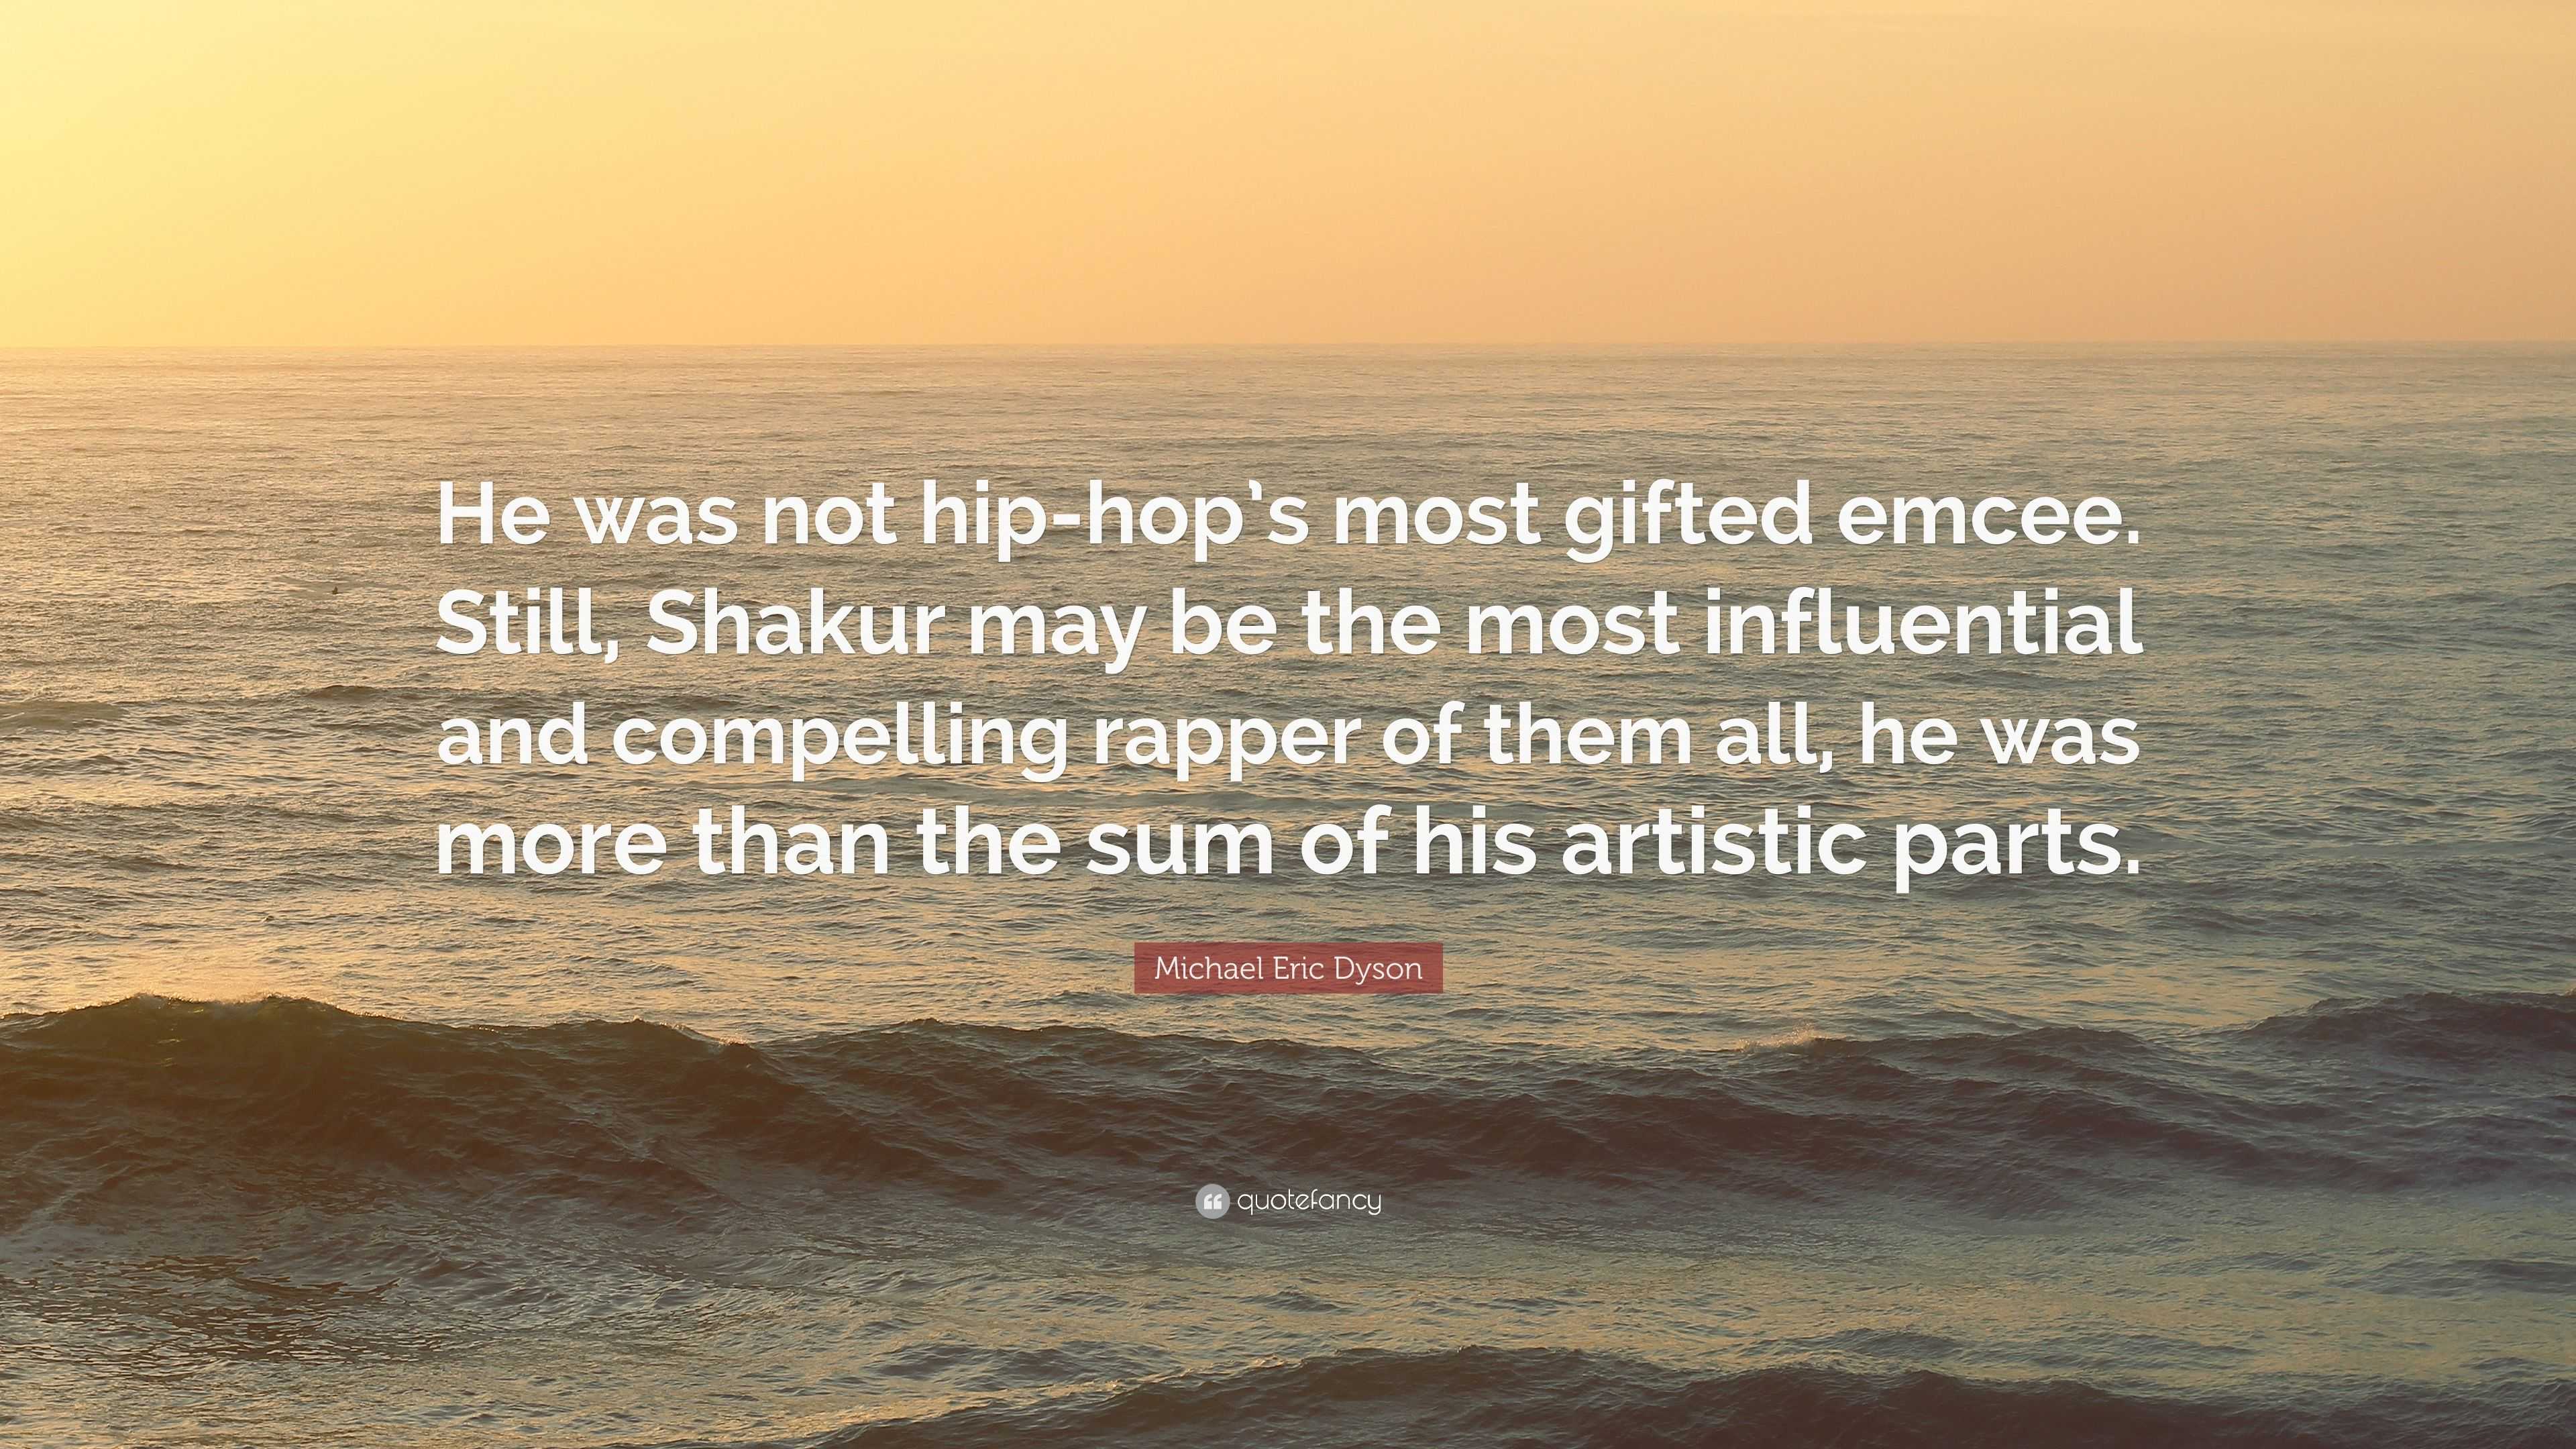 Michael Eric Dyson Quote: “He was not hip-hop’s most gifted emcee ...